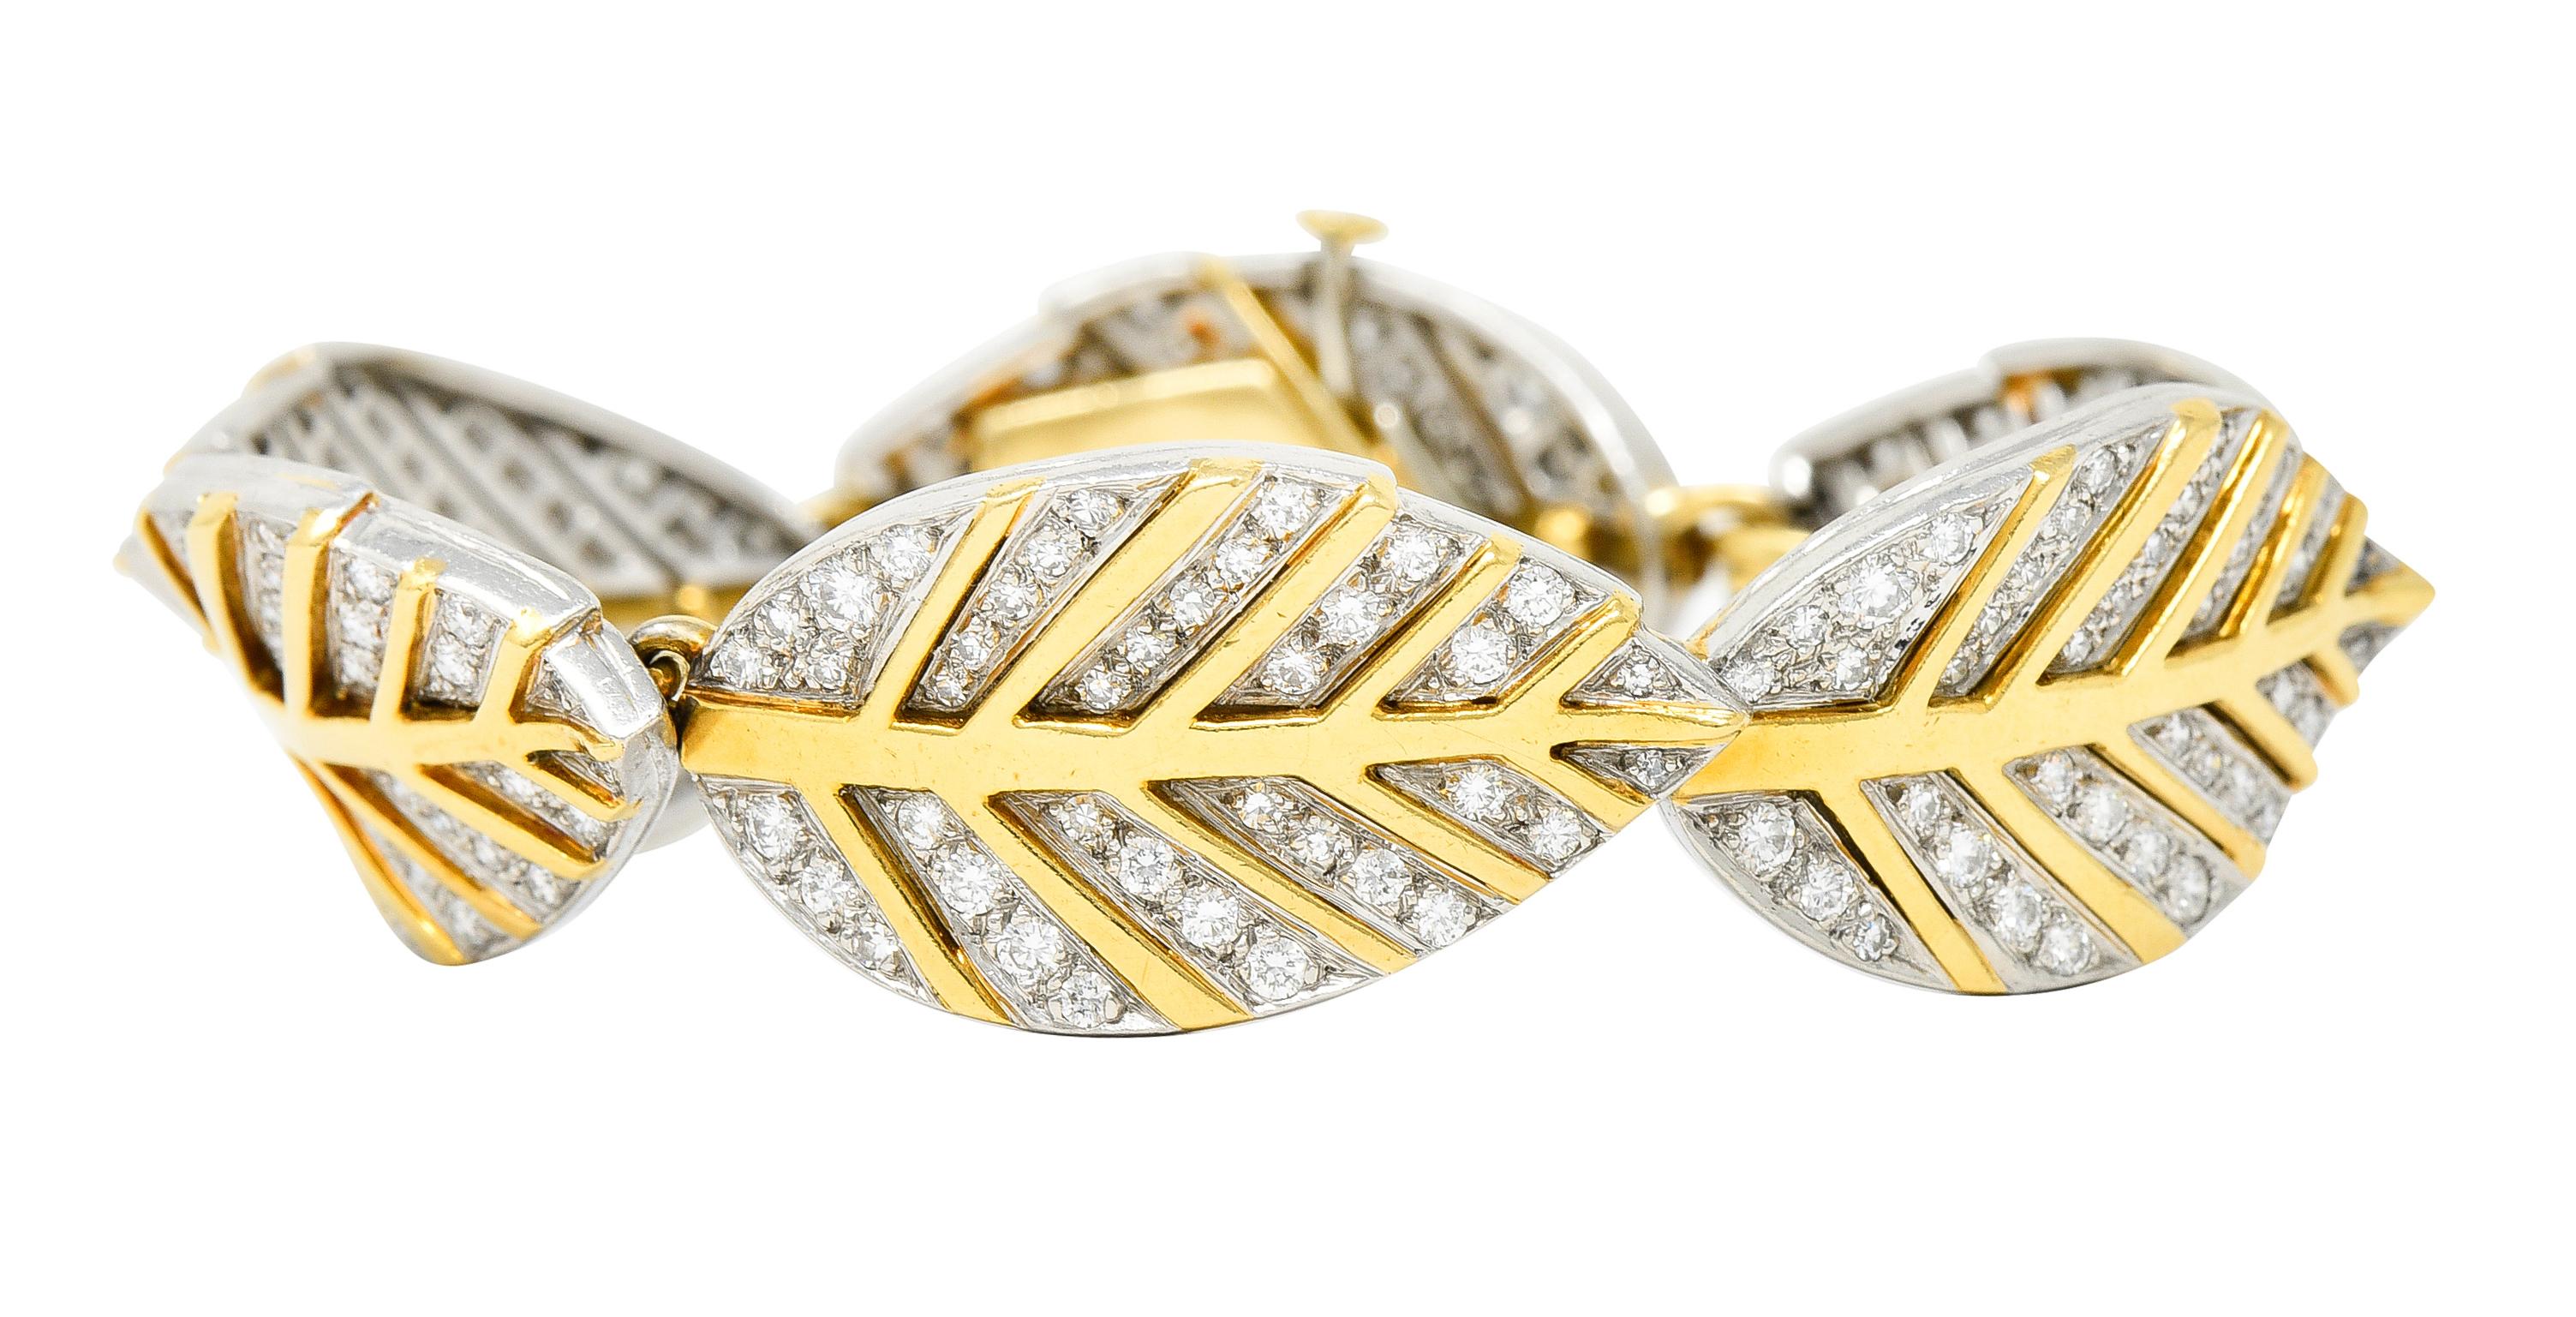 Link bracelet is comprised of navette shaped leaves

Links slightly articulate and facilitate an arched form

Leaves are platinum with polished gold veining

Then pavè set throughout by round brilliant cut diamonds

Weighing in total approximately